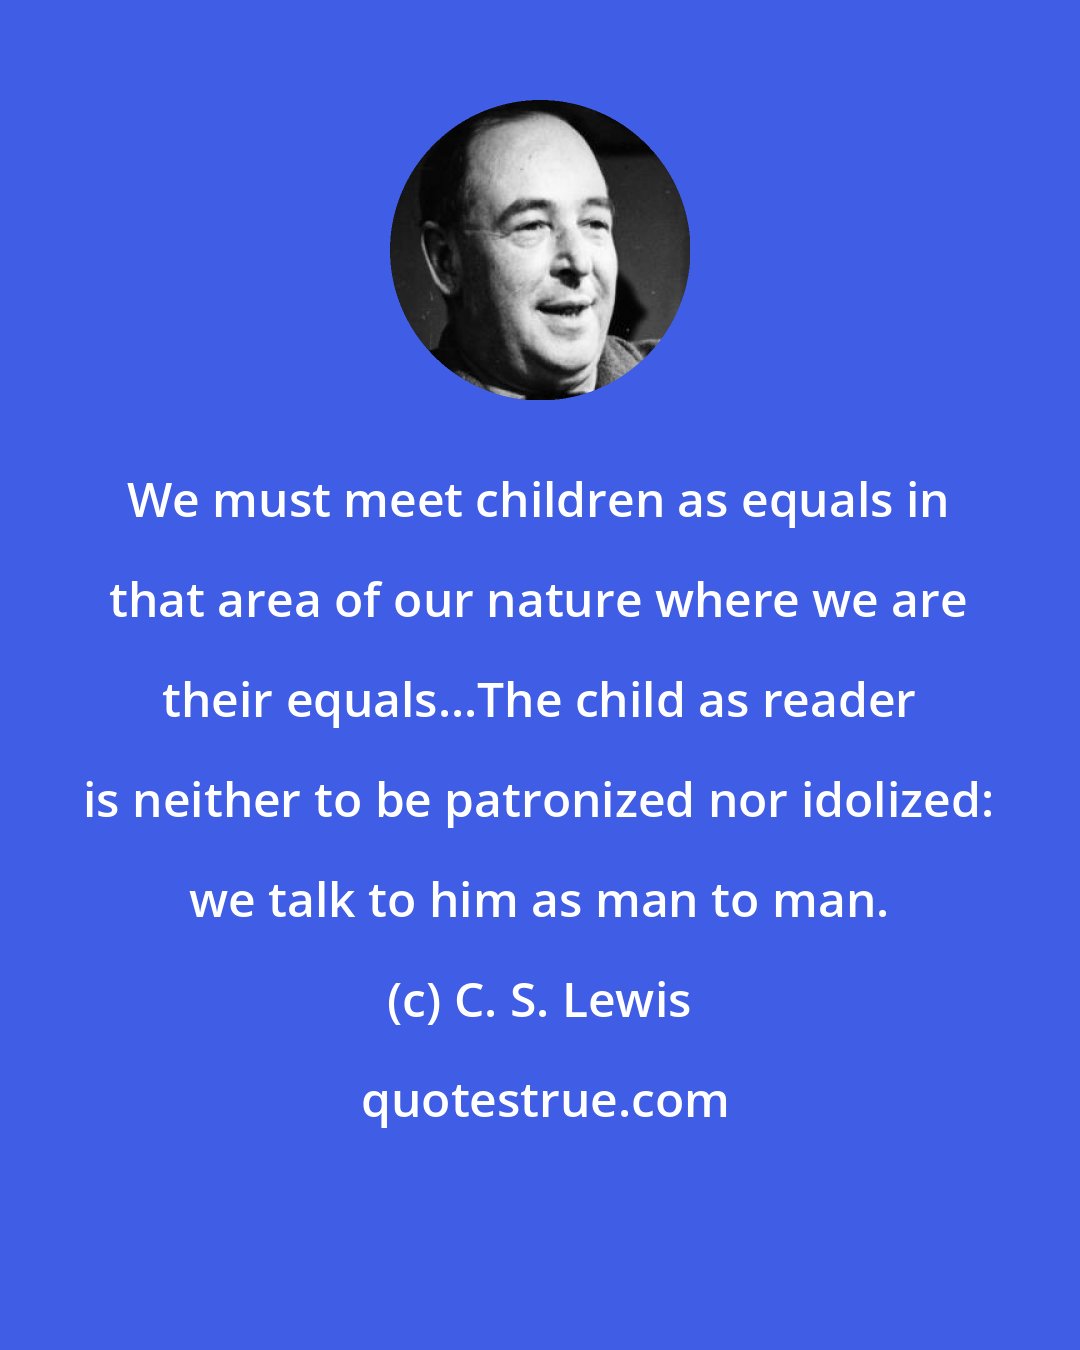 C. S. Lewis: We must meet children as equals in that area of our nature where we are their equals...The child as reader is neither to be patronized nor idolized: we talk to him as man to man.